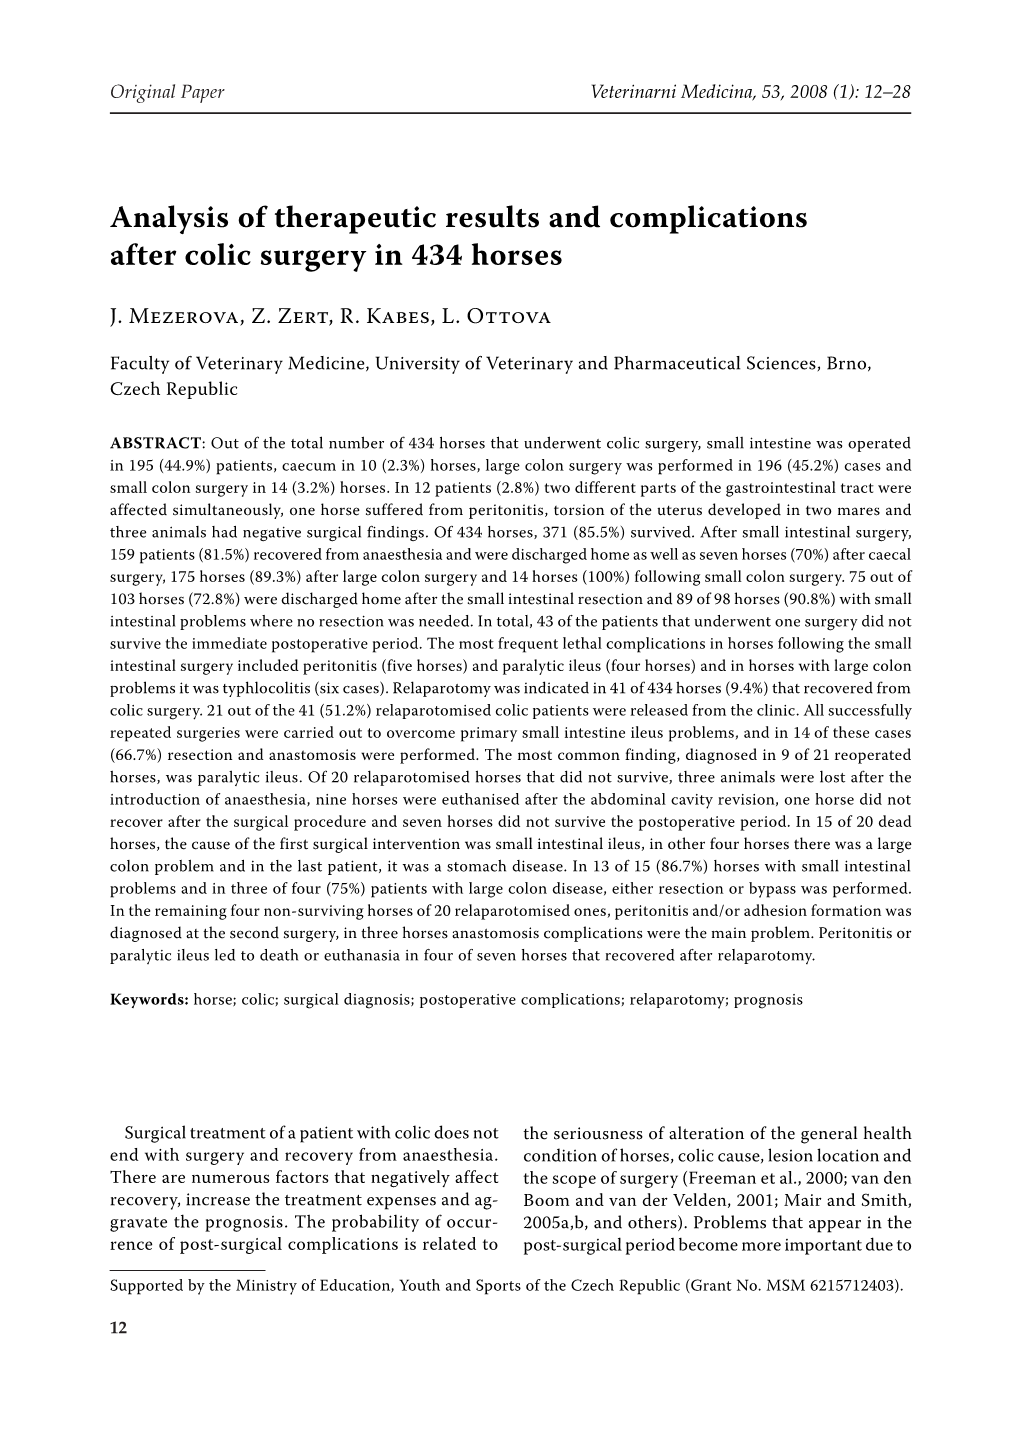 Analysis of Therapeutic Results and Complications After Colic Surgery in 434 Horses